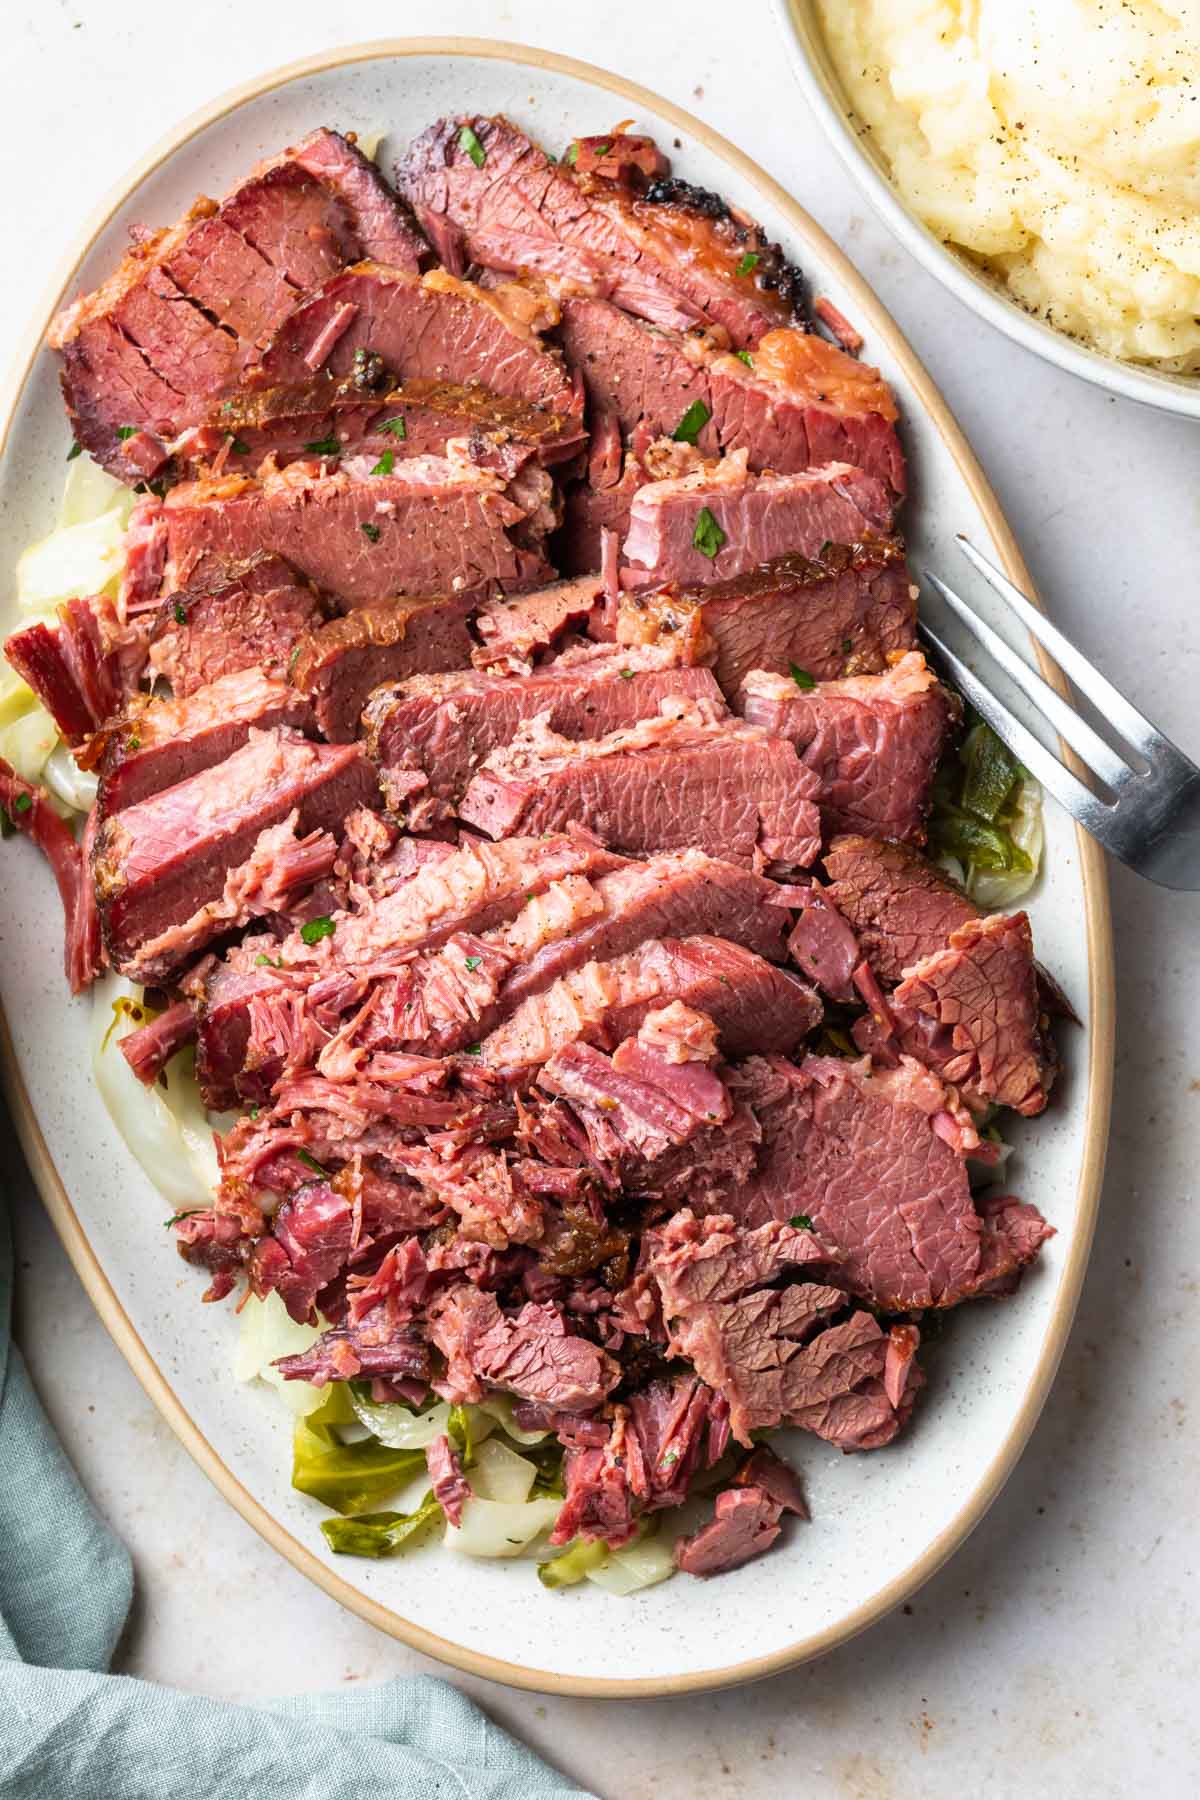 baked corned beef and cabbage on a platter